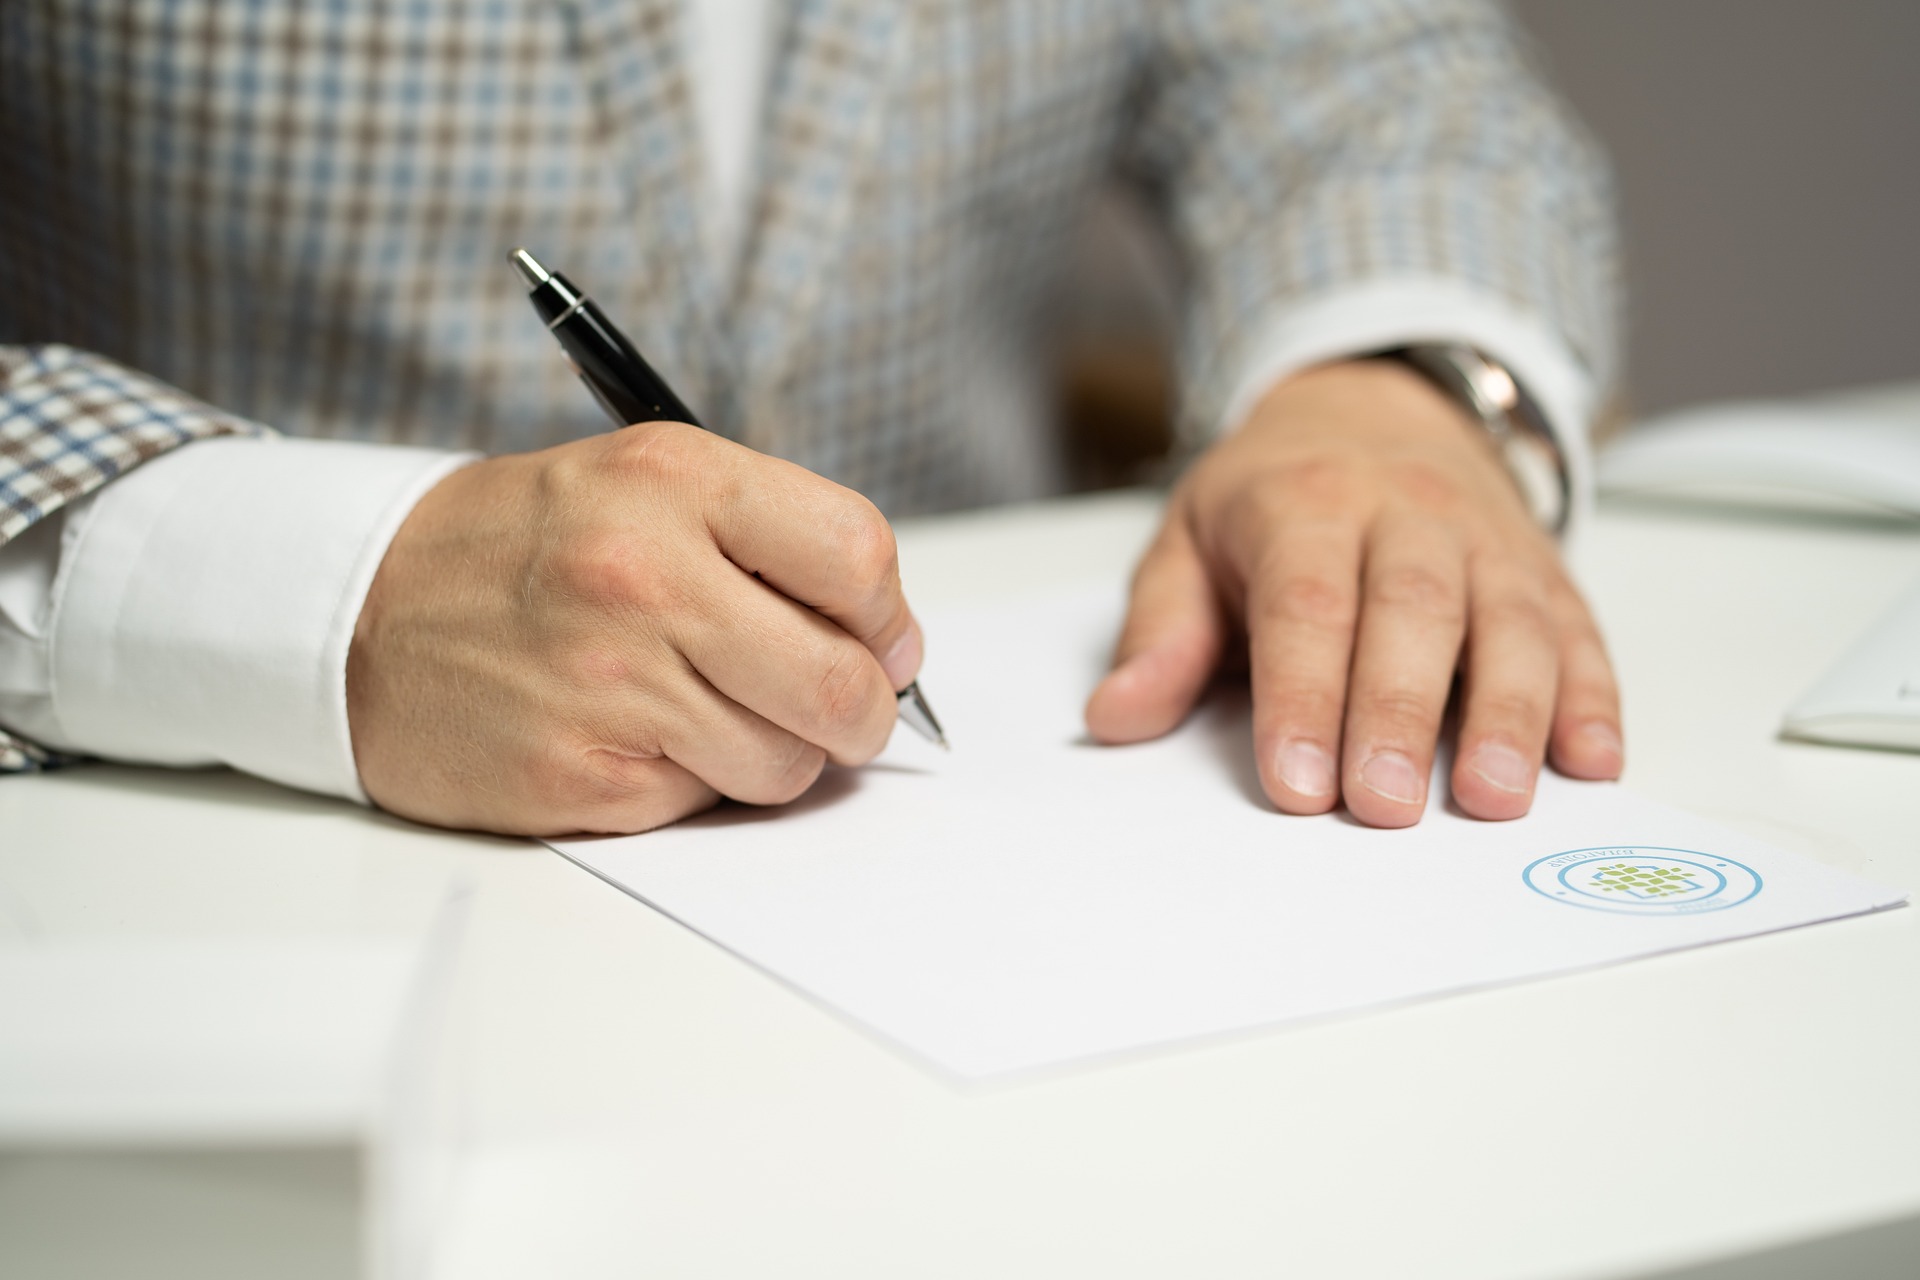 A person dressed smartly, signing a legal document; click this image to visit our Wills Solicitors' page on how to sign a Will.